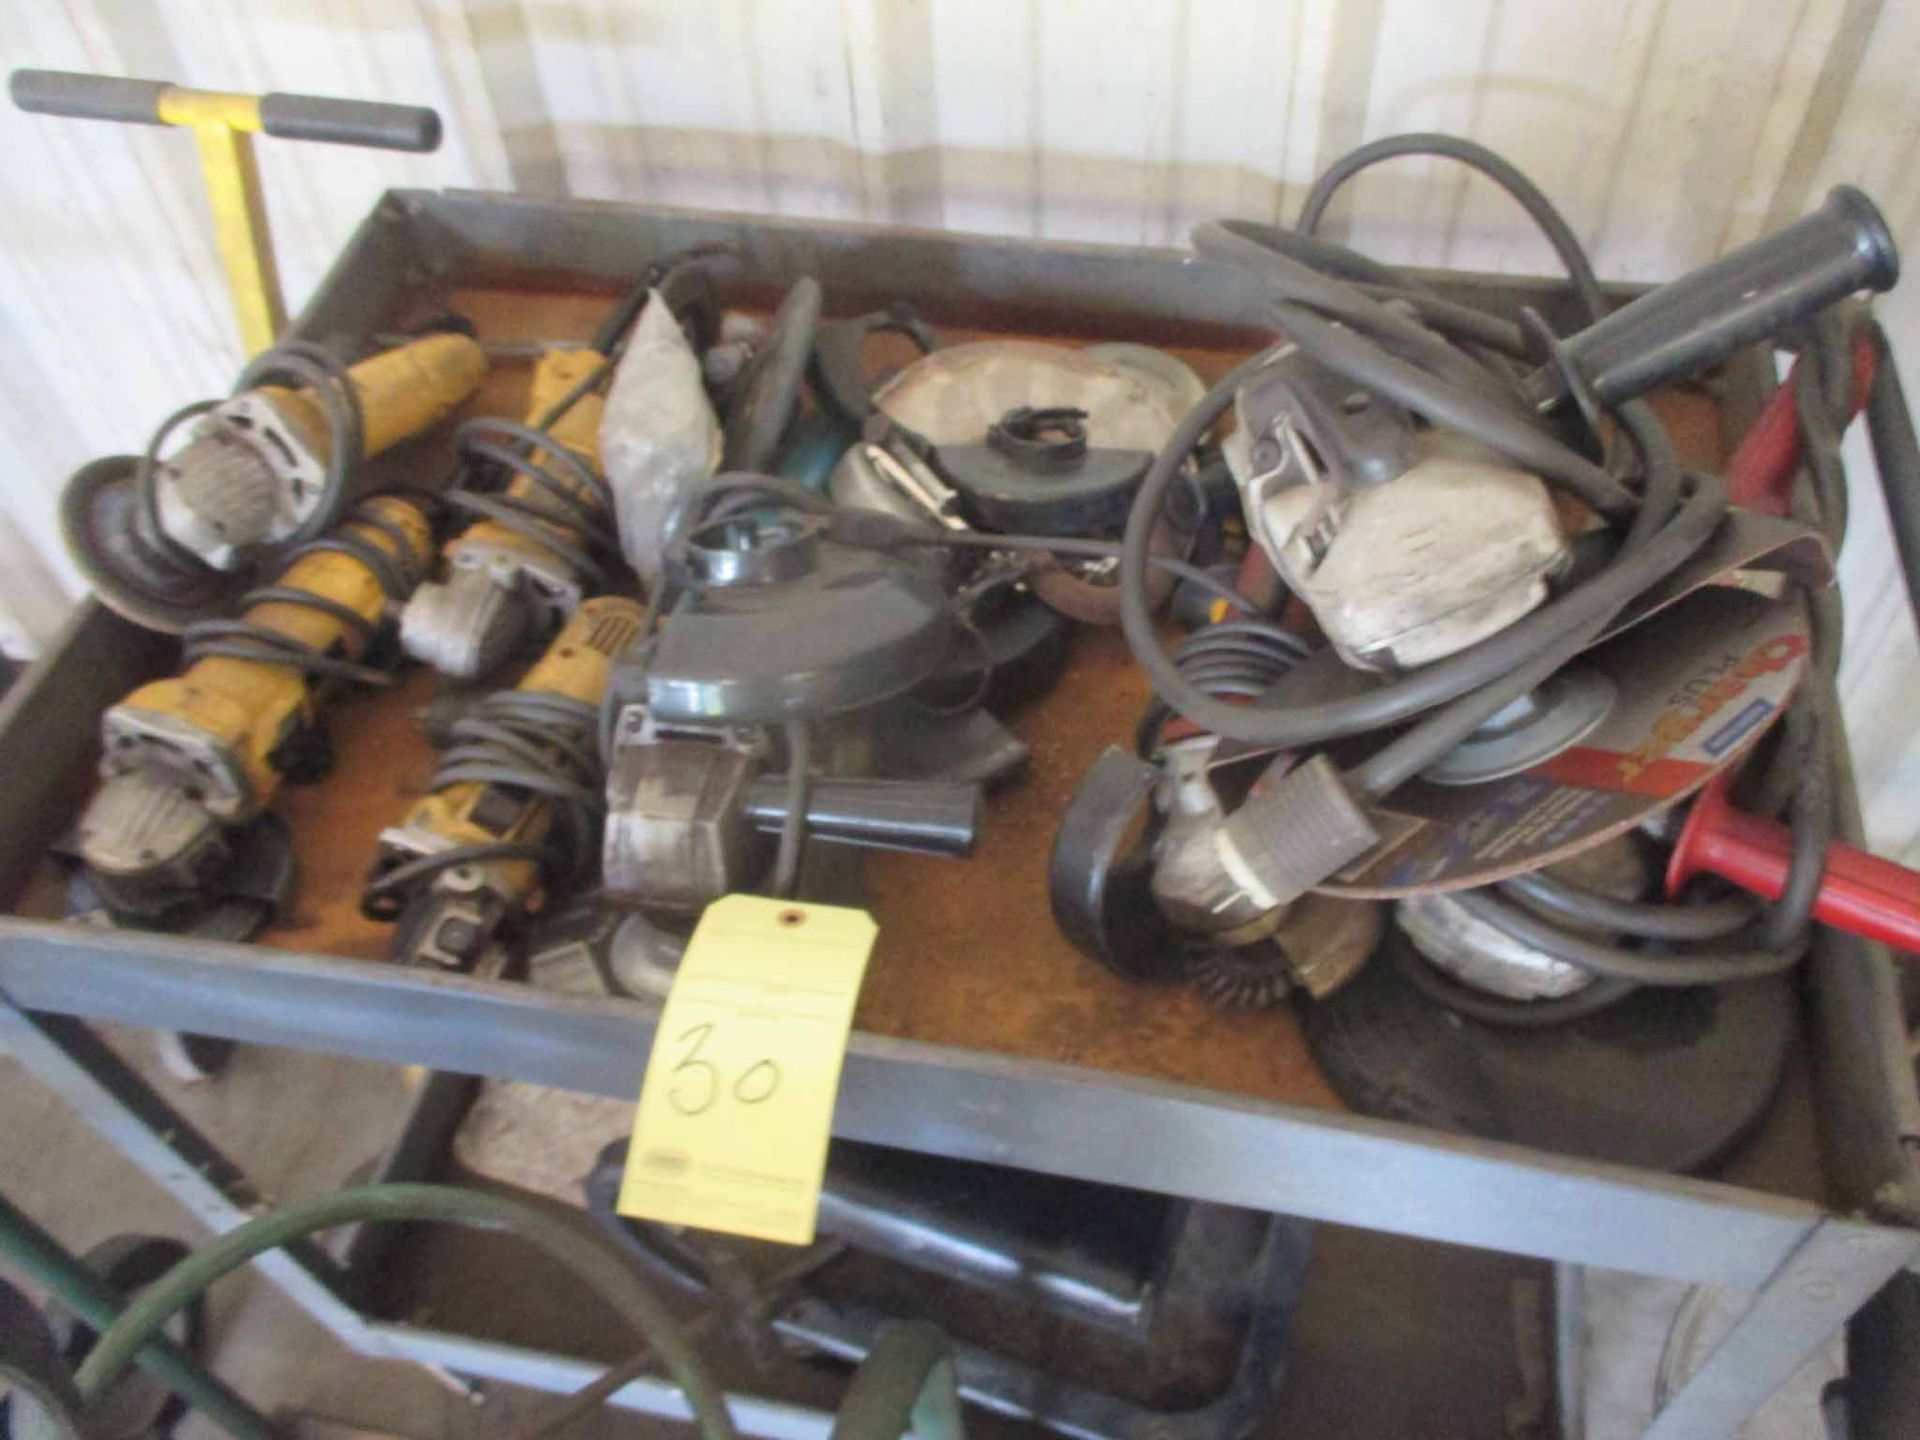 LOT OF GRINDERS, 4 1/2" & 7 1/2", w/carts